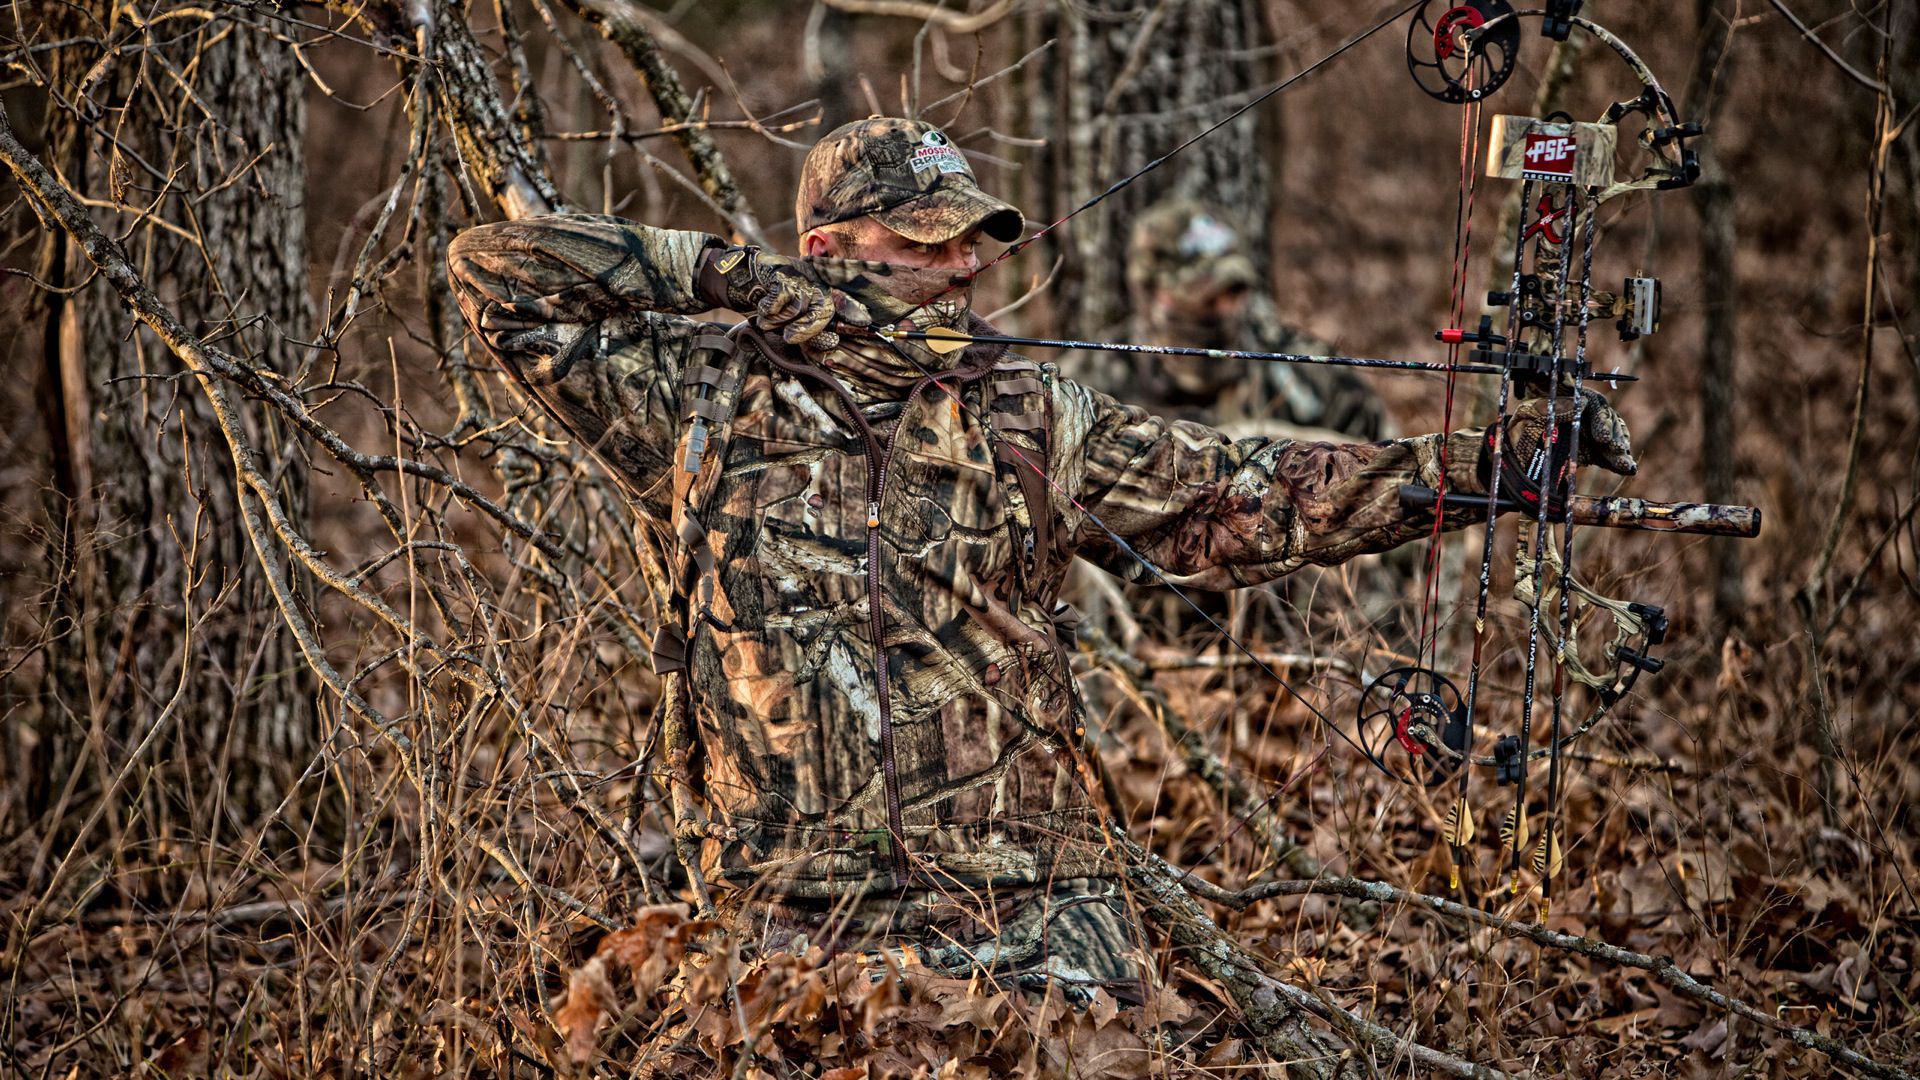 Mossy Oak Duck Blind Camo Wallpaper Image Pictures Becuo